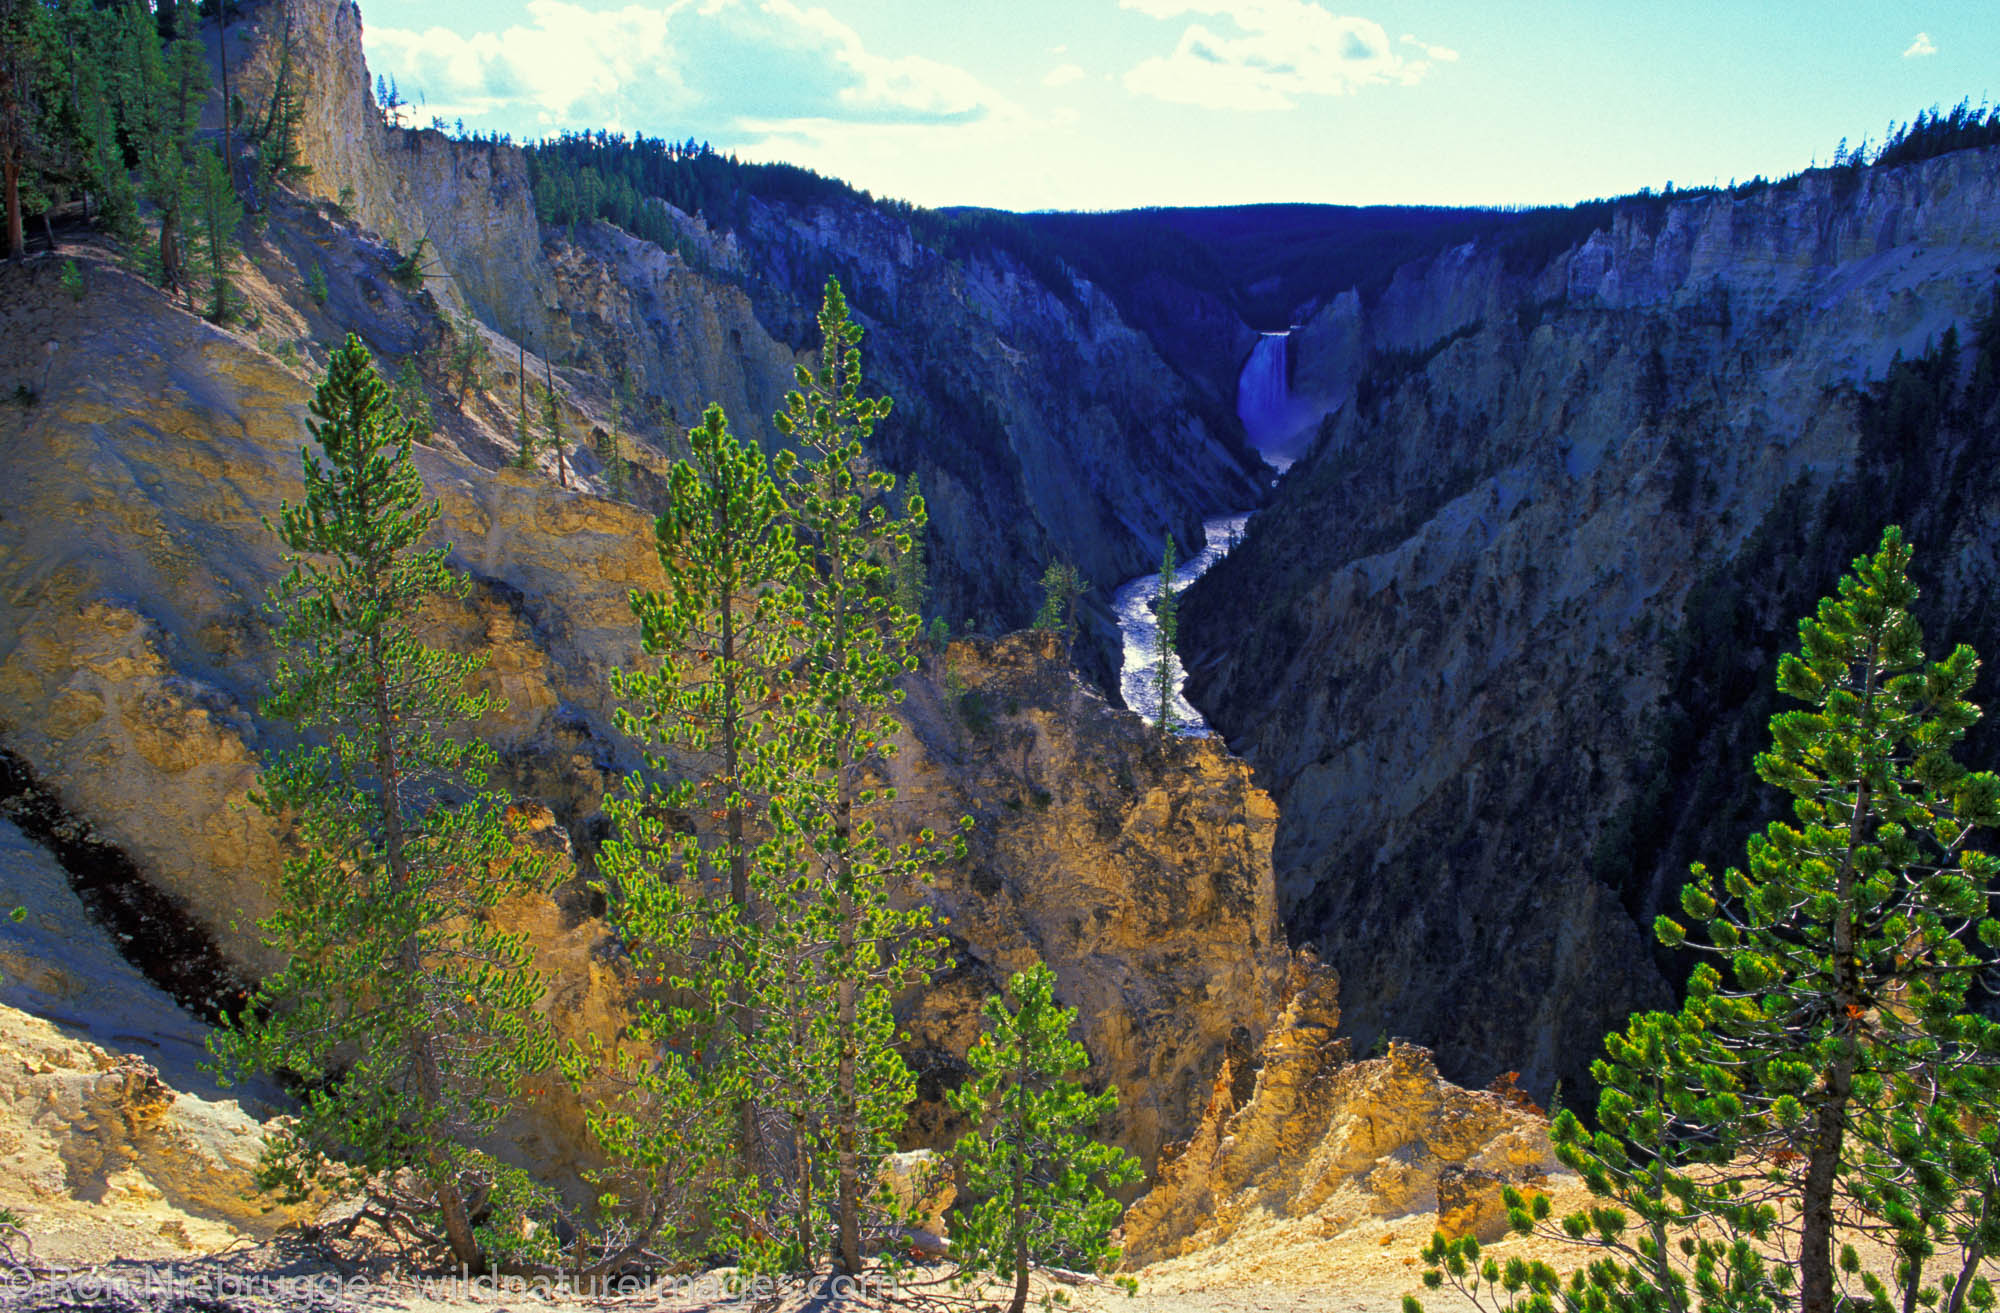 The Grand Canyon of Yellowstone National Park, Wyoming.